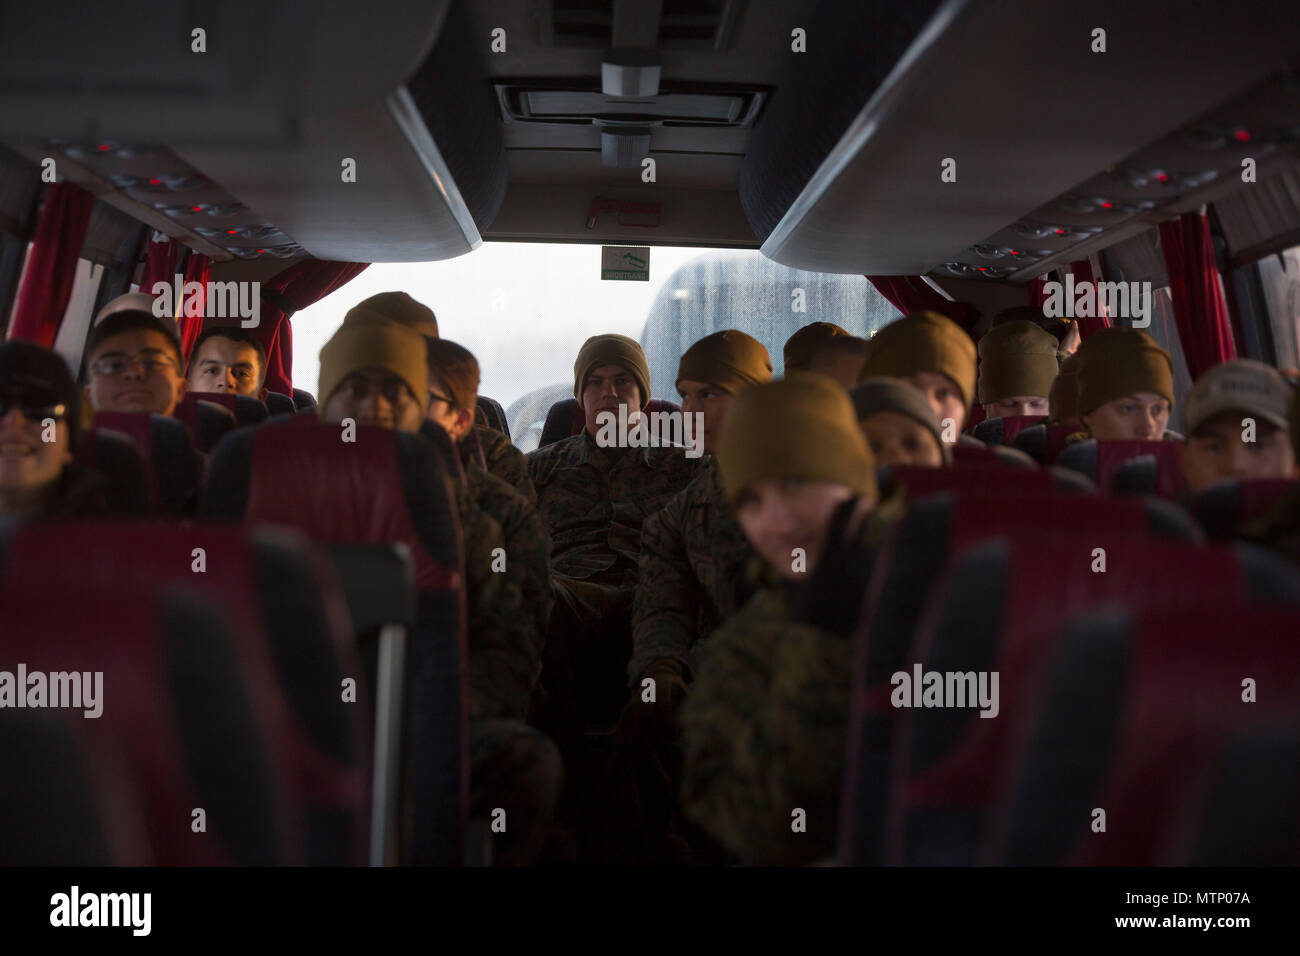 U.S. Marines board a bus on the tarmac headed to garrison at Vaernes Garnison, Norway, Jan. 16, 2017. The Marines with Black Sea Rotational Force 17.1 arrived at Vaernes Garnison early in the morning as part of Marine Rotational Force Europe 17.1. (U.S. Marine Corps photo by Lance Cpl. Victoria Ross) Stock Photo